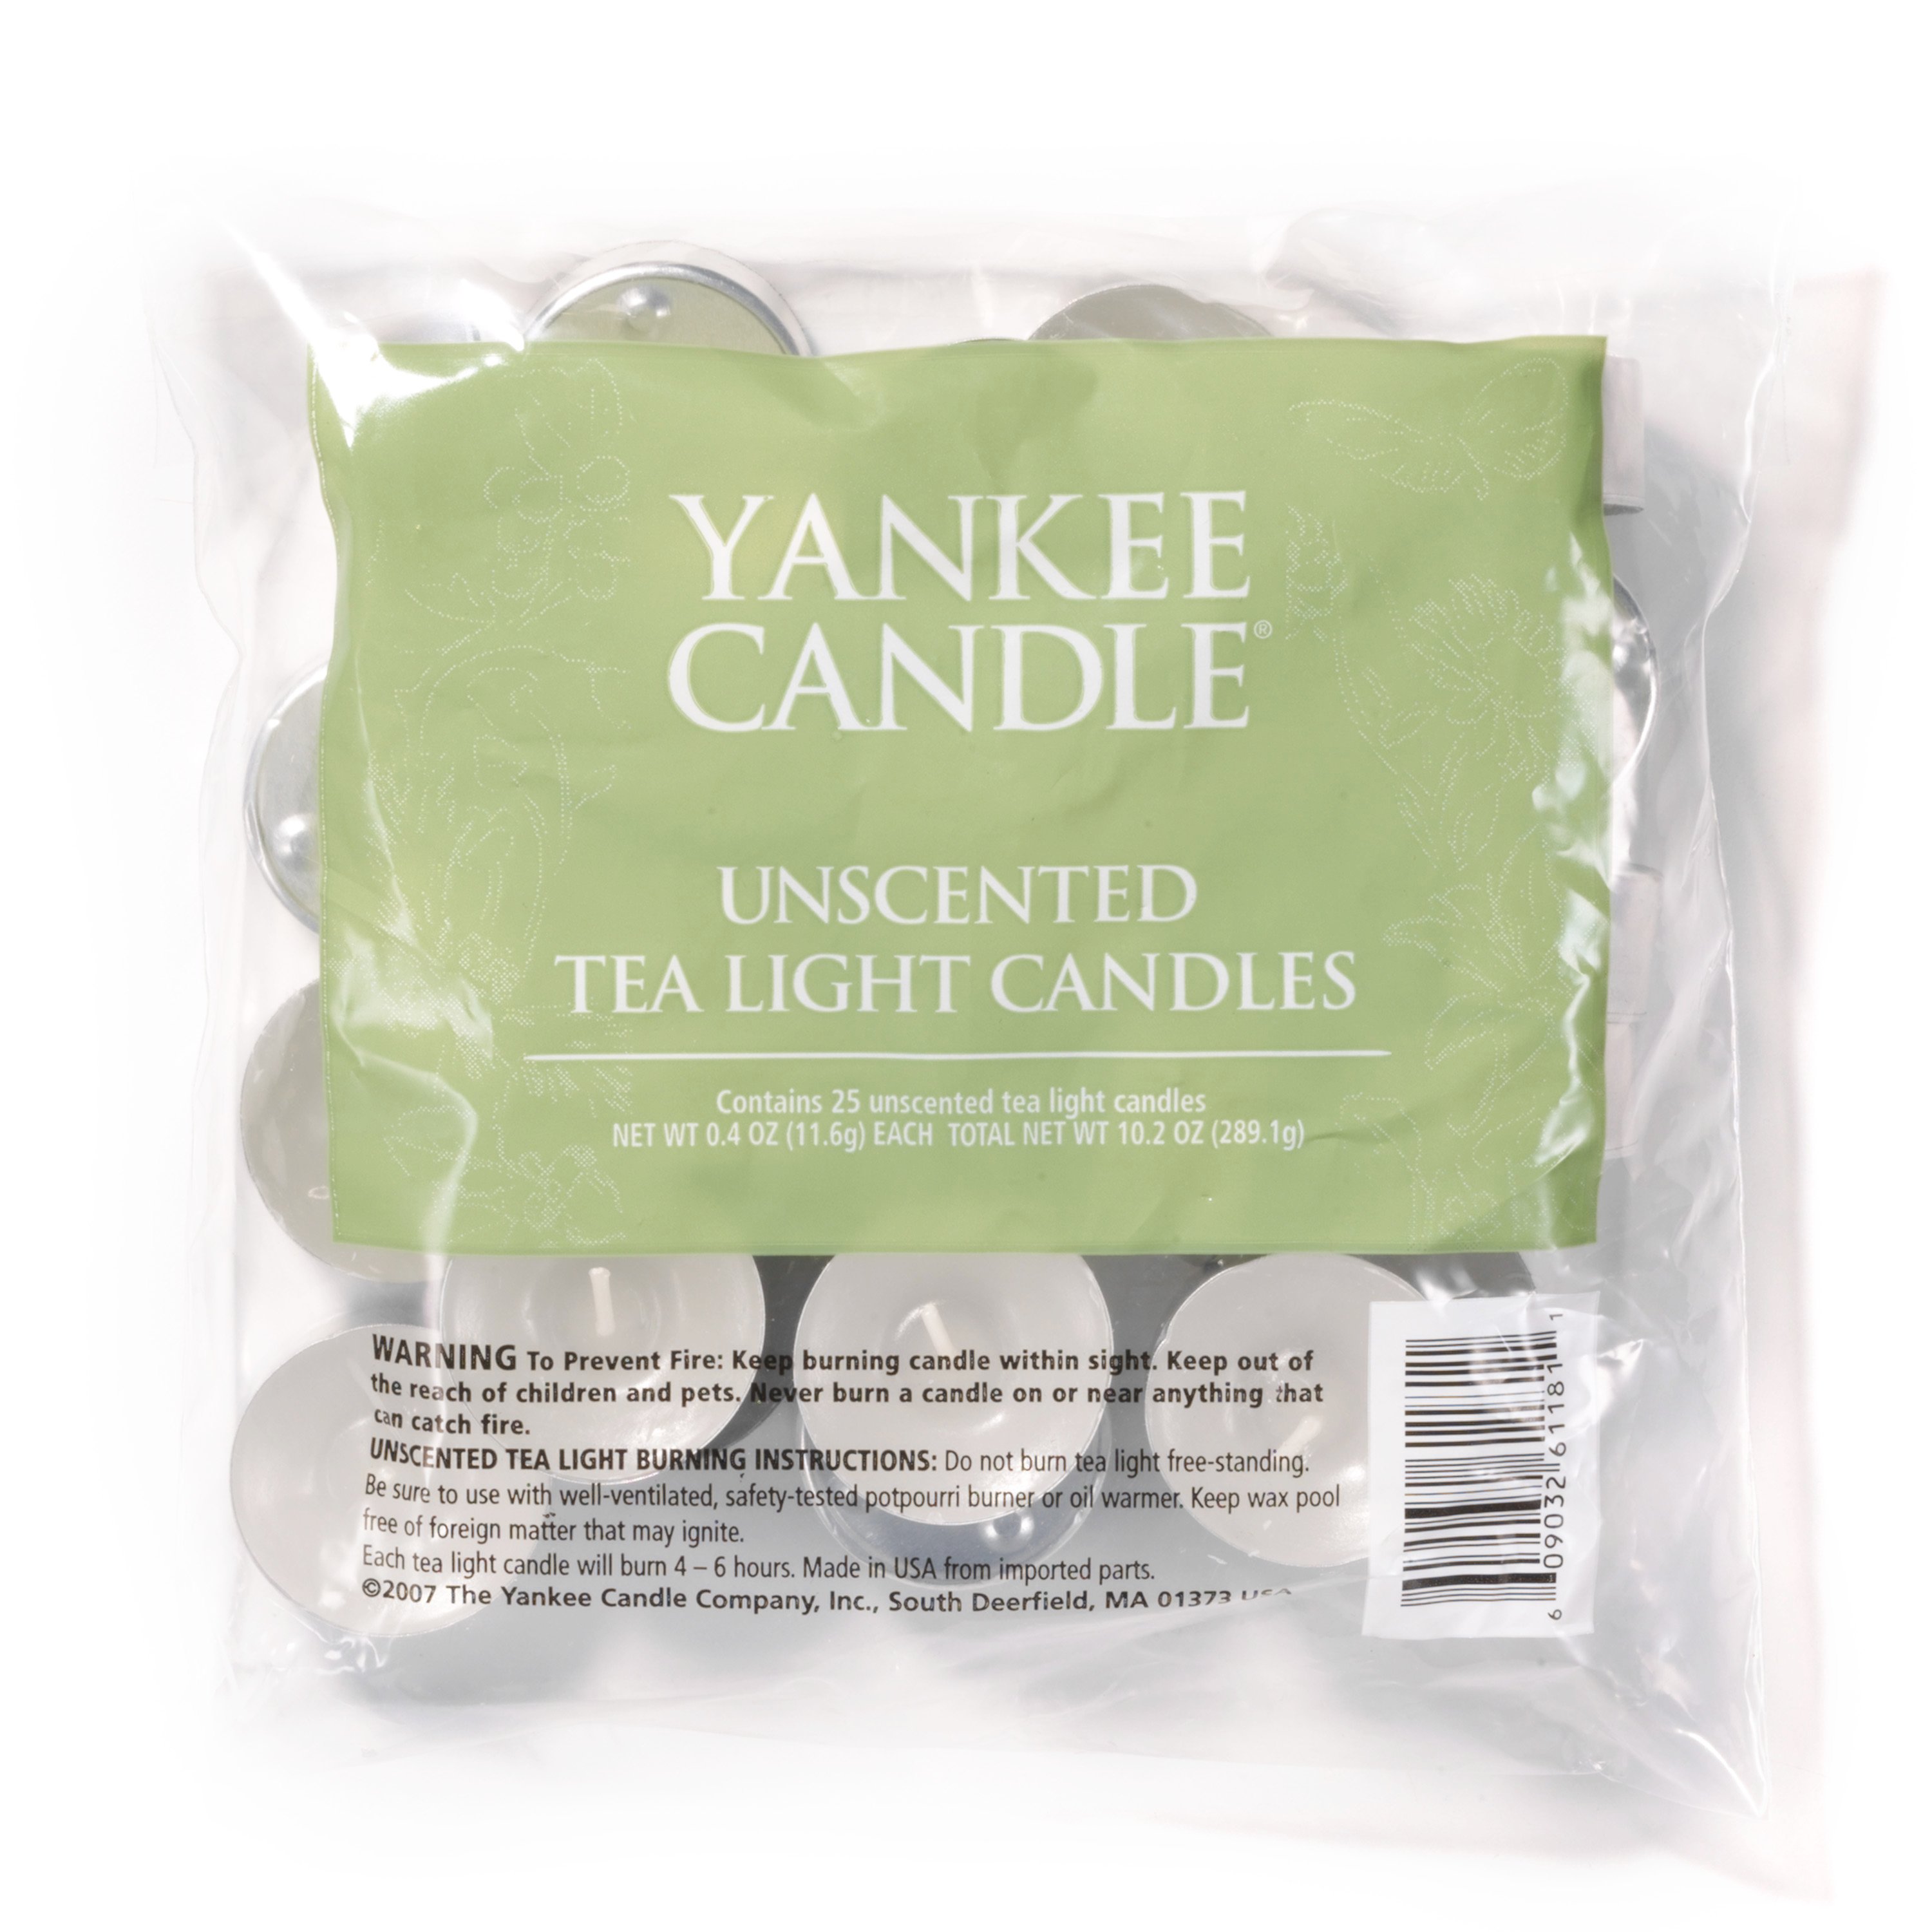 Yankee Candle Tea Light Scented Candles 12 Count Vanilla Lime 